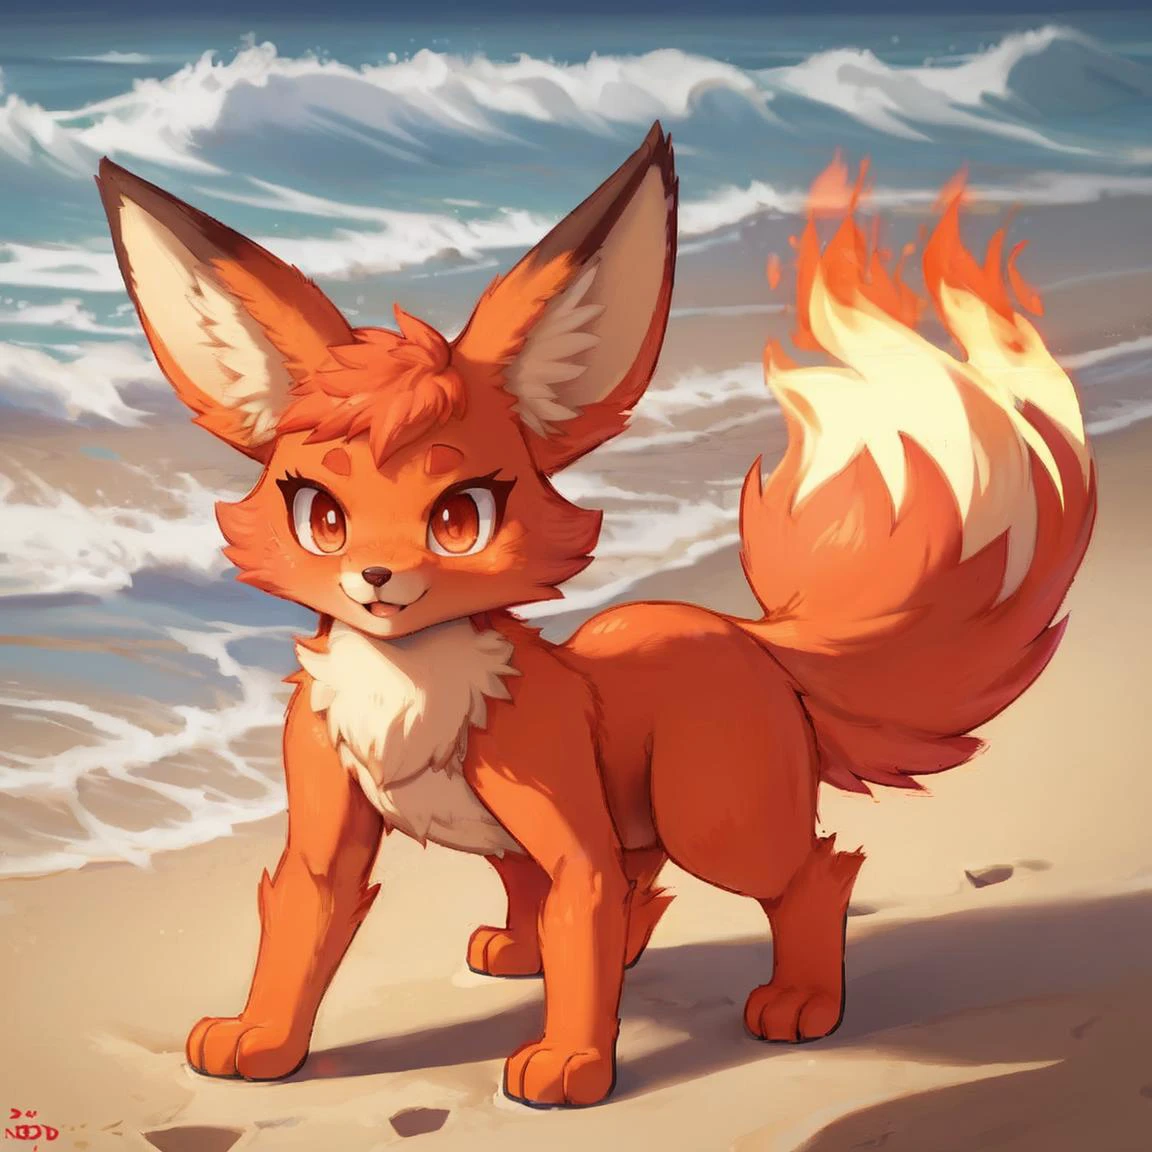 cute, very beautiful, fantastic,artistic, fire, flaming paws, animal, foxparks, on the beach (SFW:1)